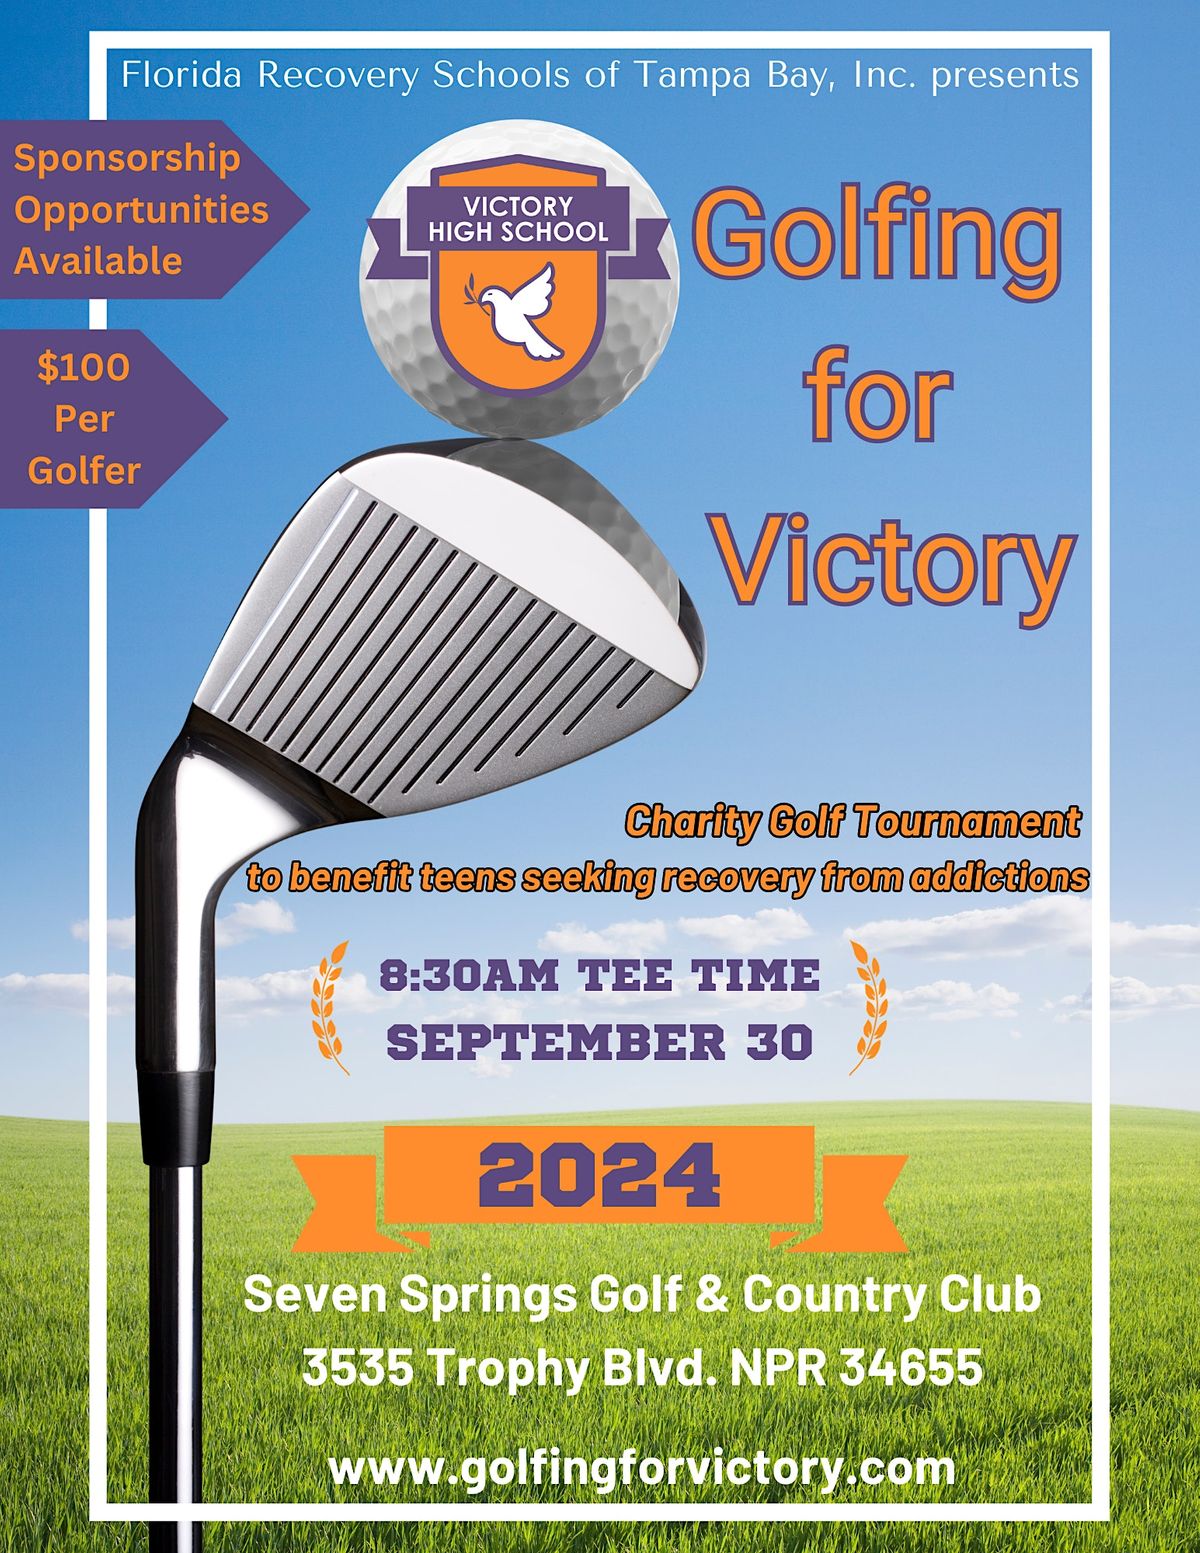 2024 Golfing for Victory Charity Golf Tournament